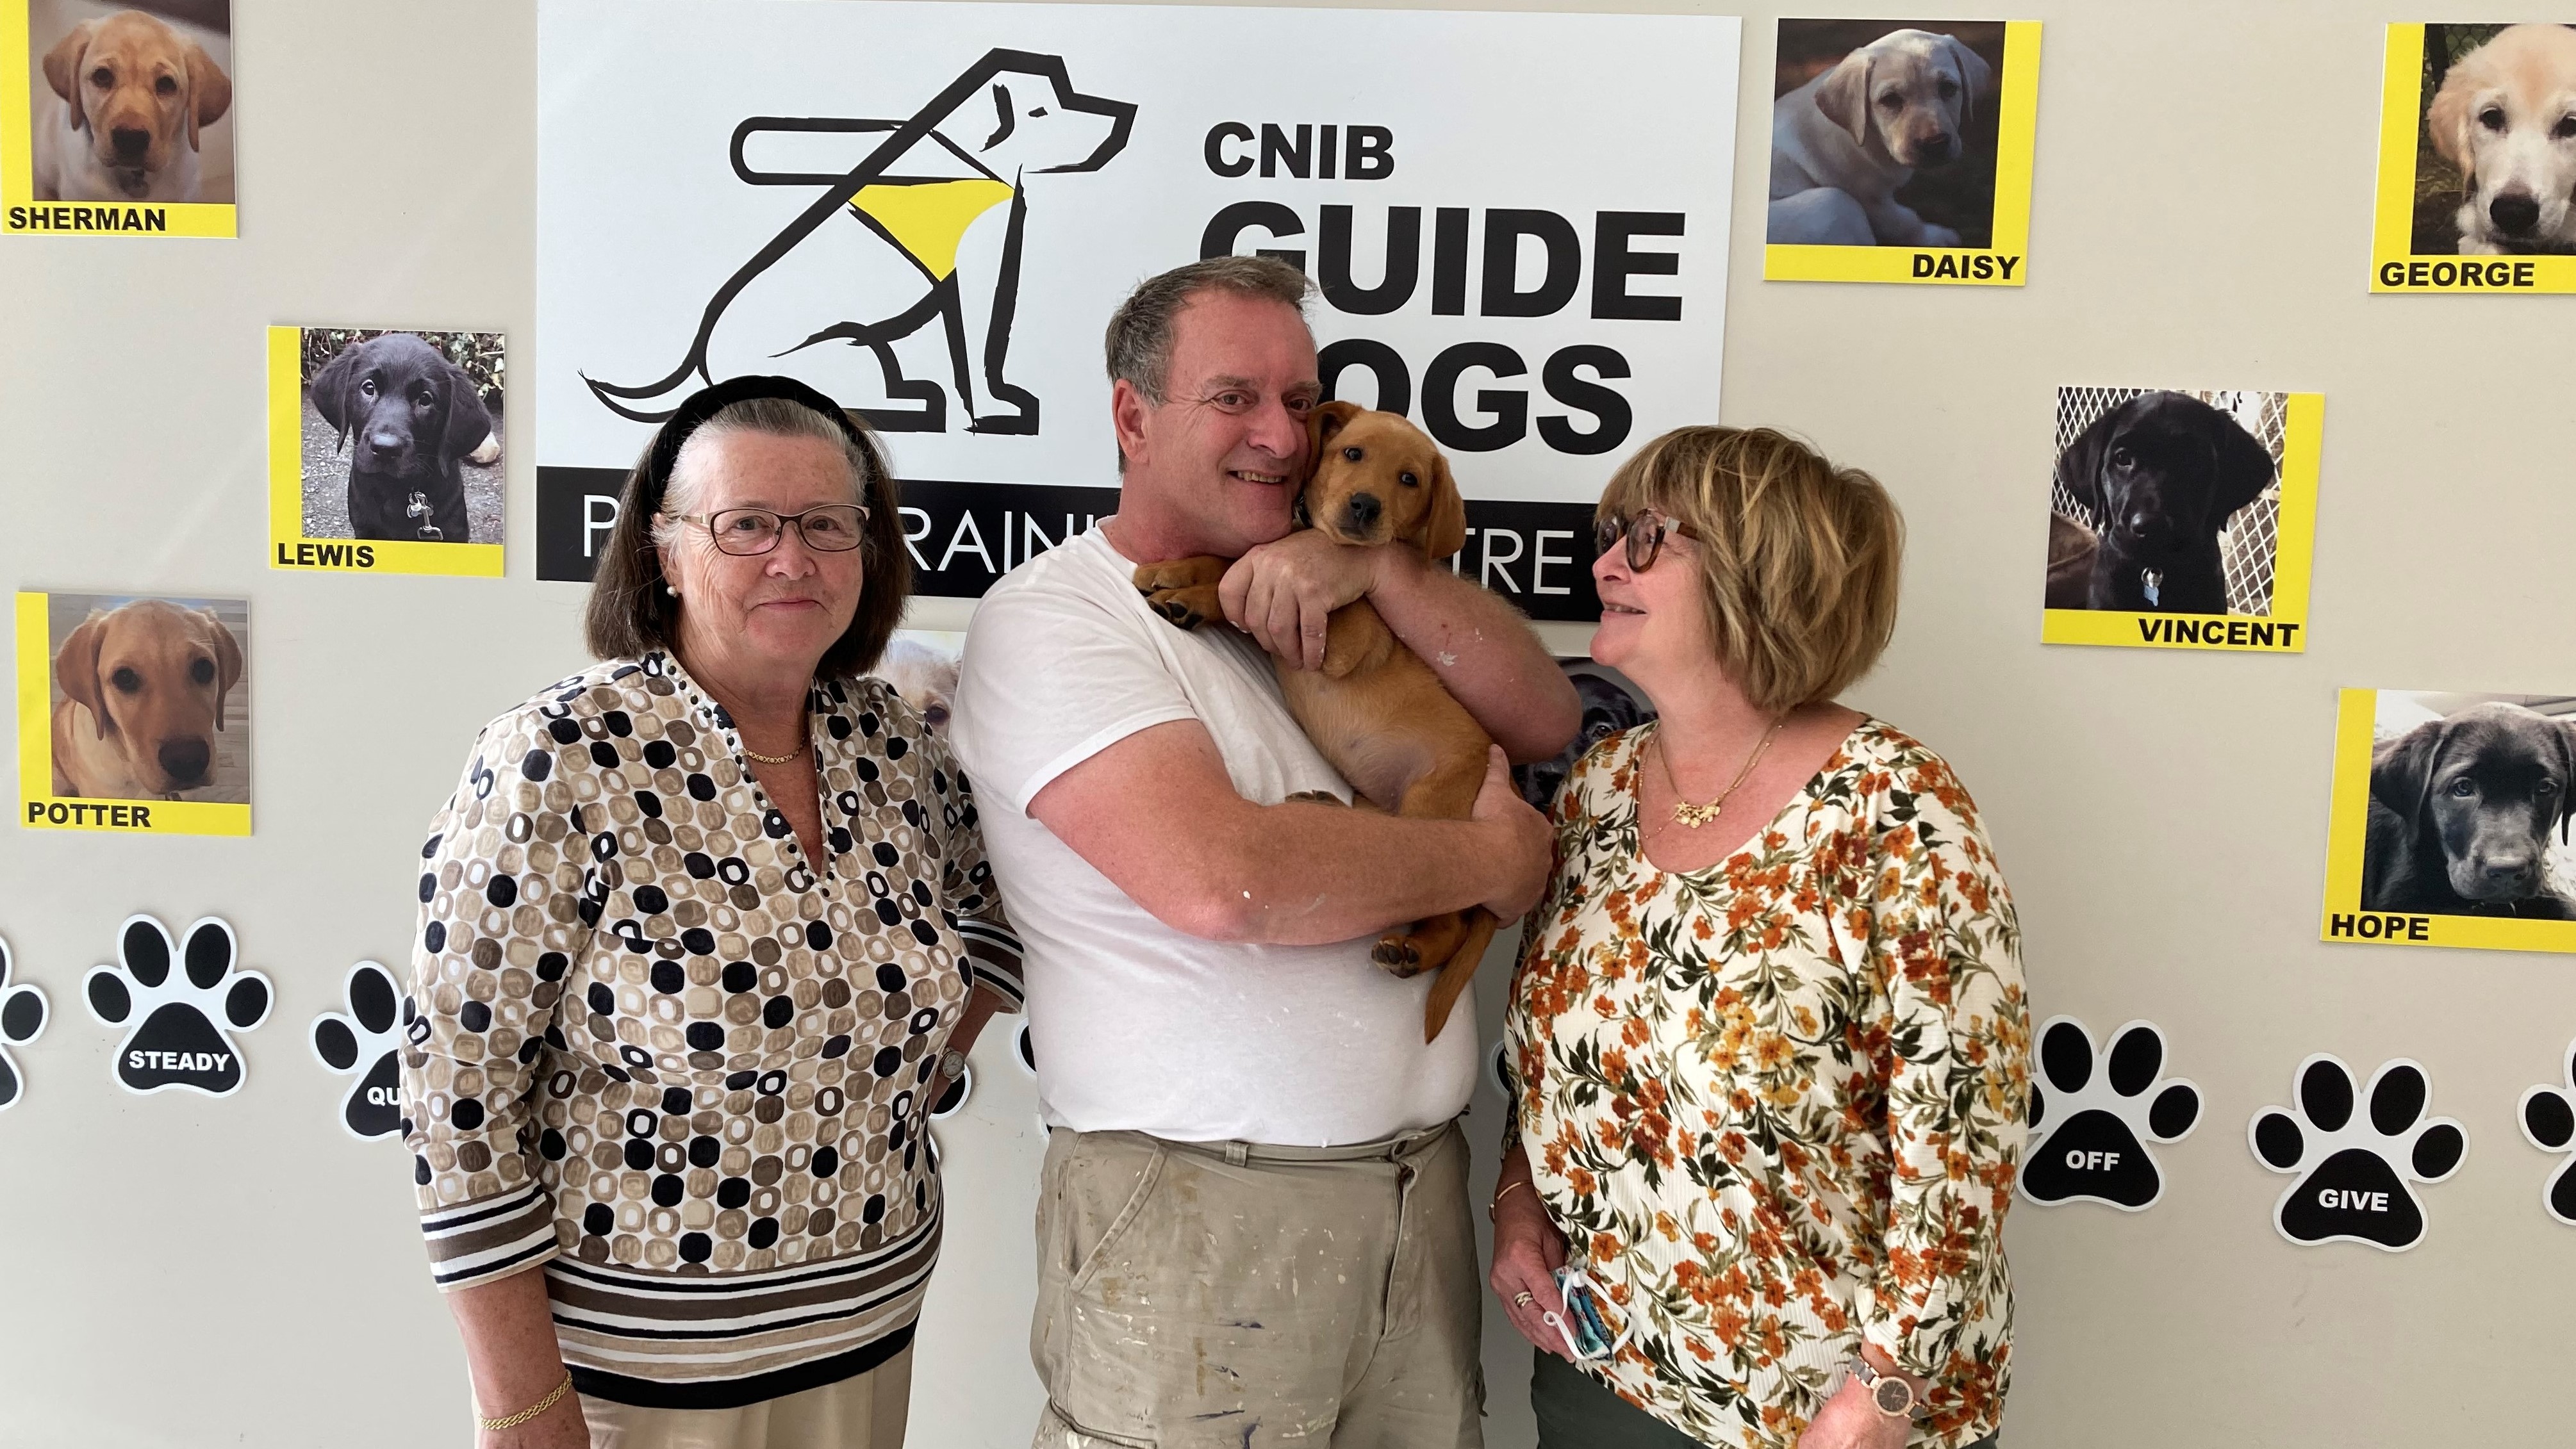 Siblings Donna, Ian, and Heather MacKenzie stand together in front of the CNIB Guide Dogs wall in the Halifax office. Ian holds future guide dog Dorrie in his arms.